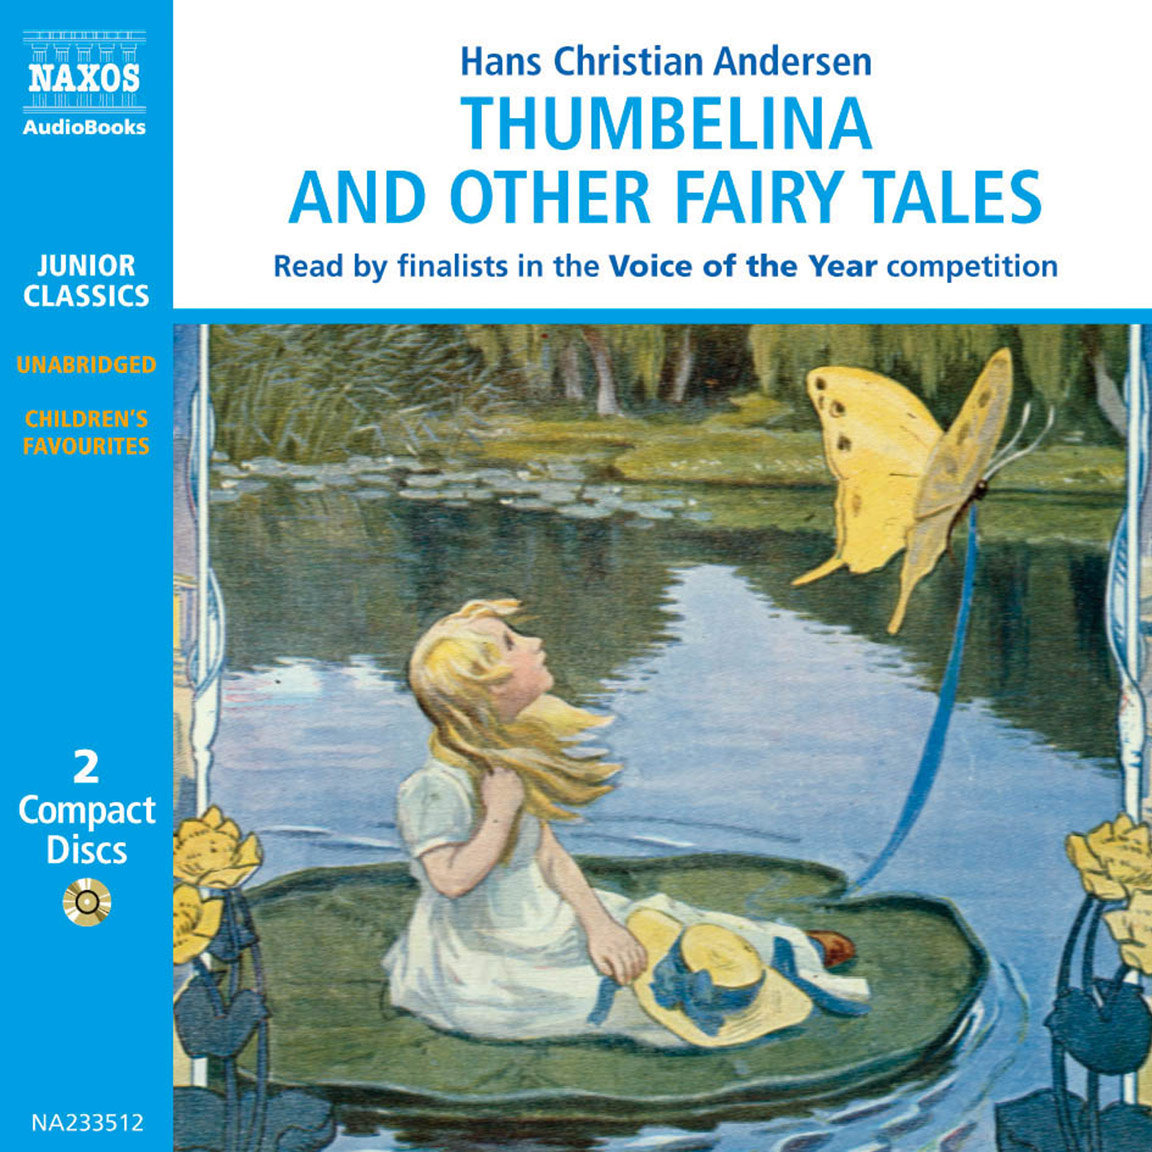 Thumbelina and other Fairy Tales (selections)